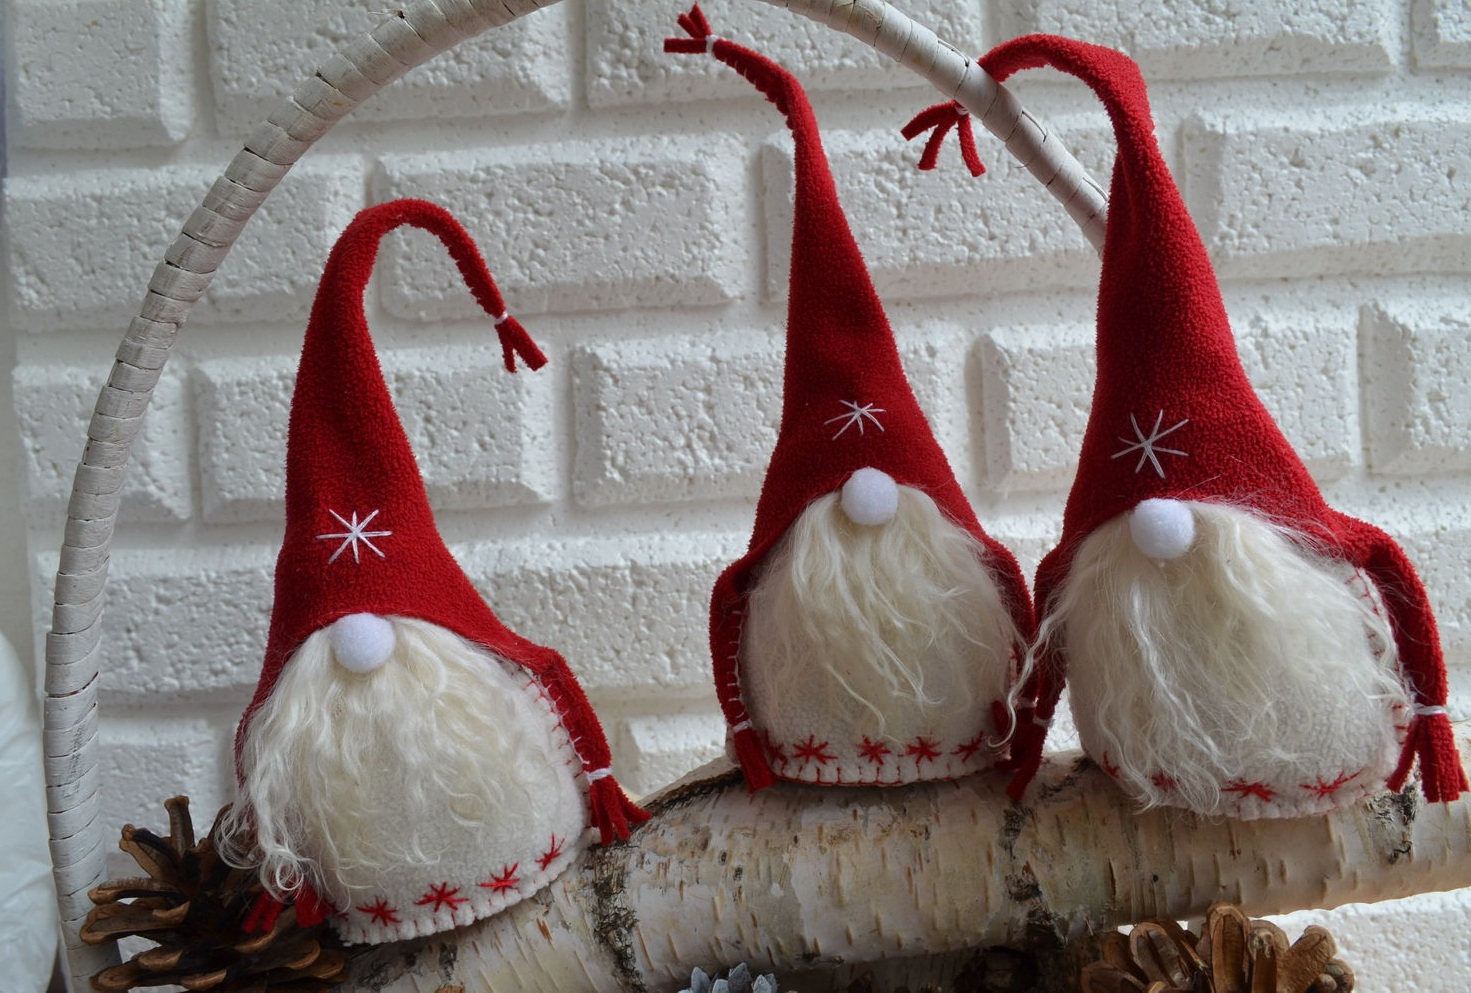 Three homemade gnomes from scraps of fabric